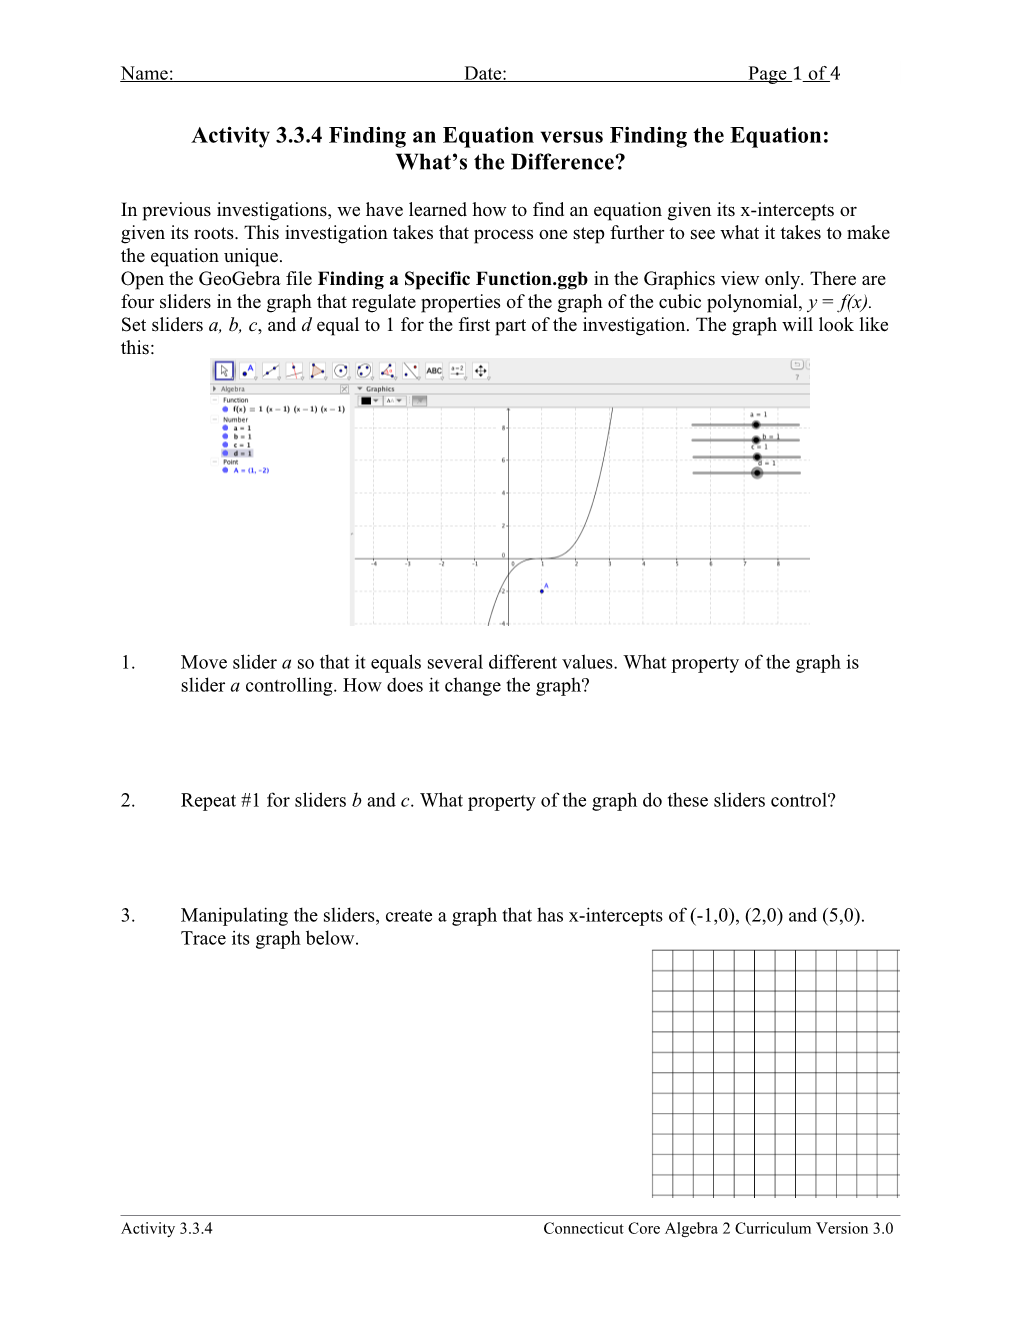 Activity 3.3.4 Finding an Equation Versus Finding the Equation